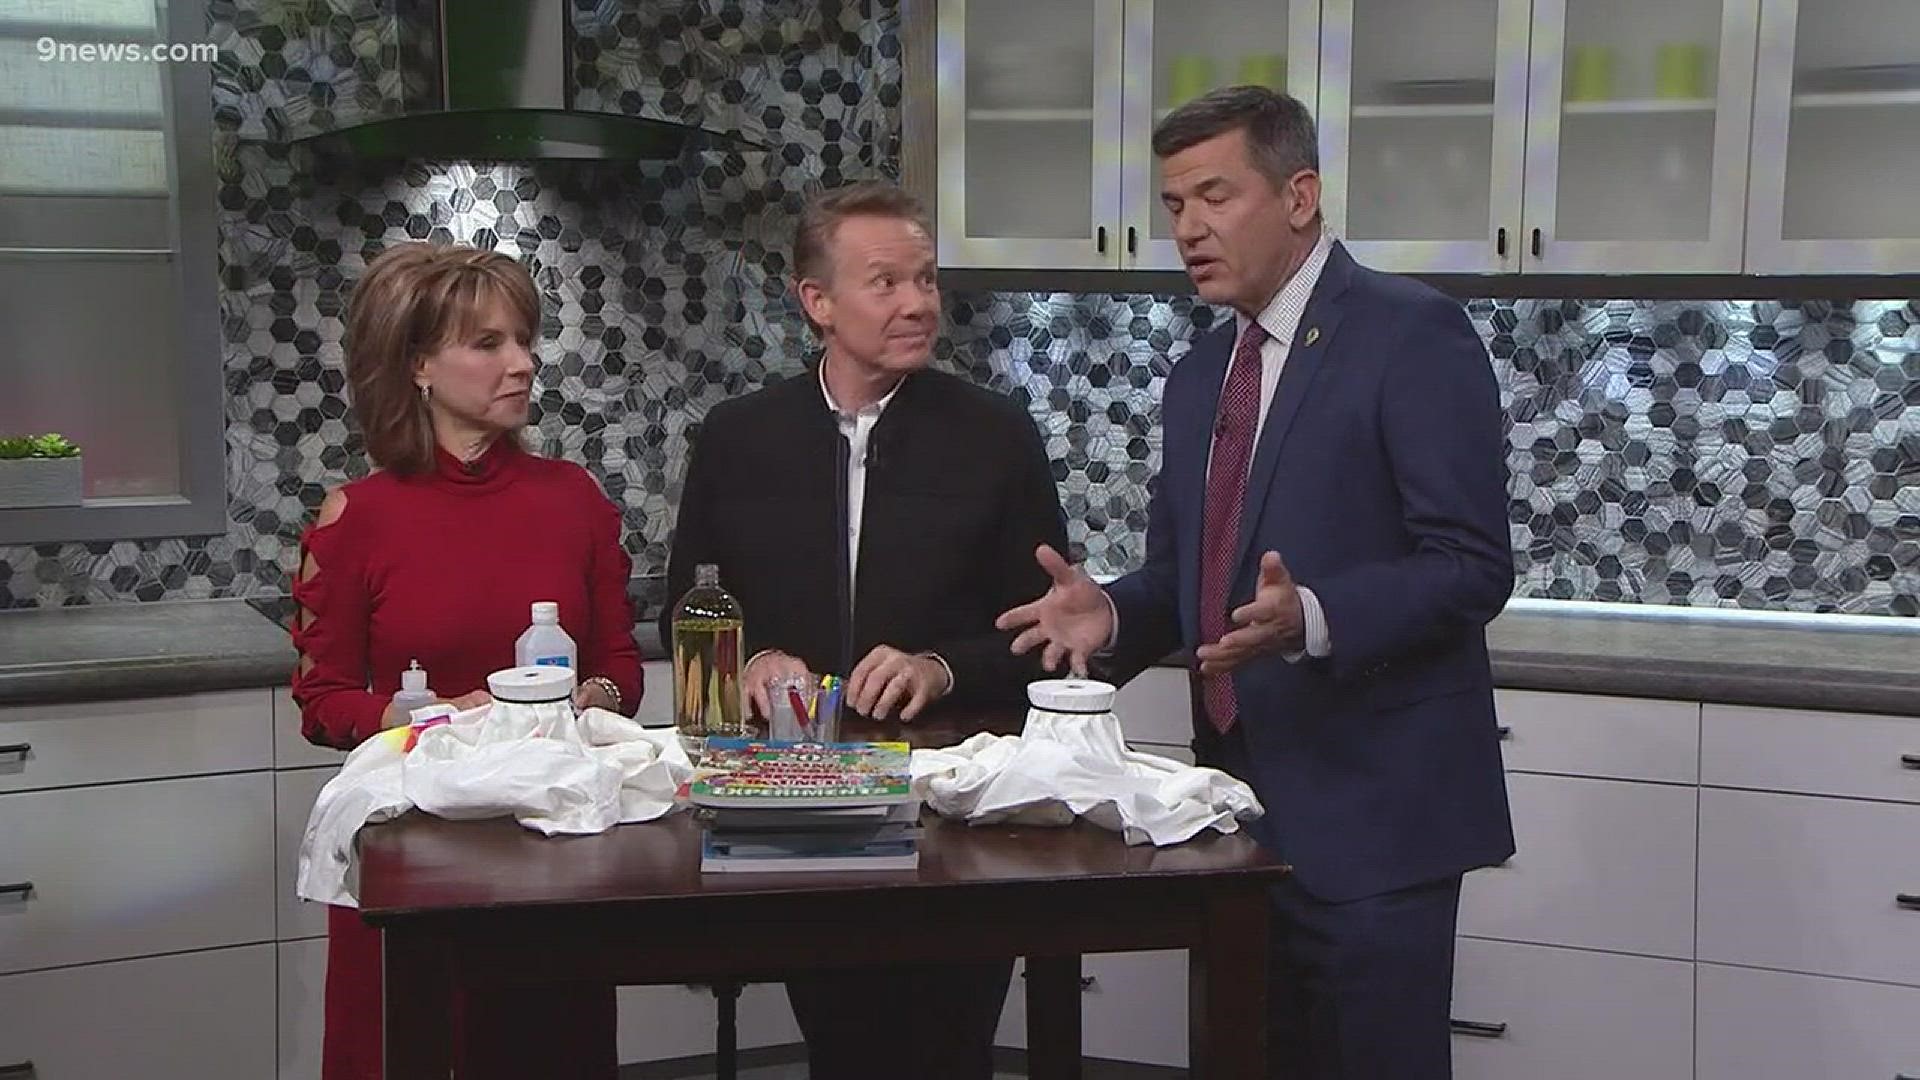 Steve Spangler came to the 9NEWS studios to talk about Cyber Monday and the best science kit to get. Spangler is going by the mantra "experience is the new gift" on this one.